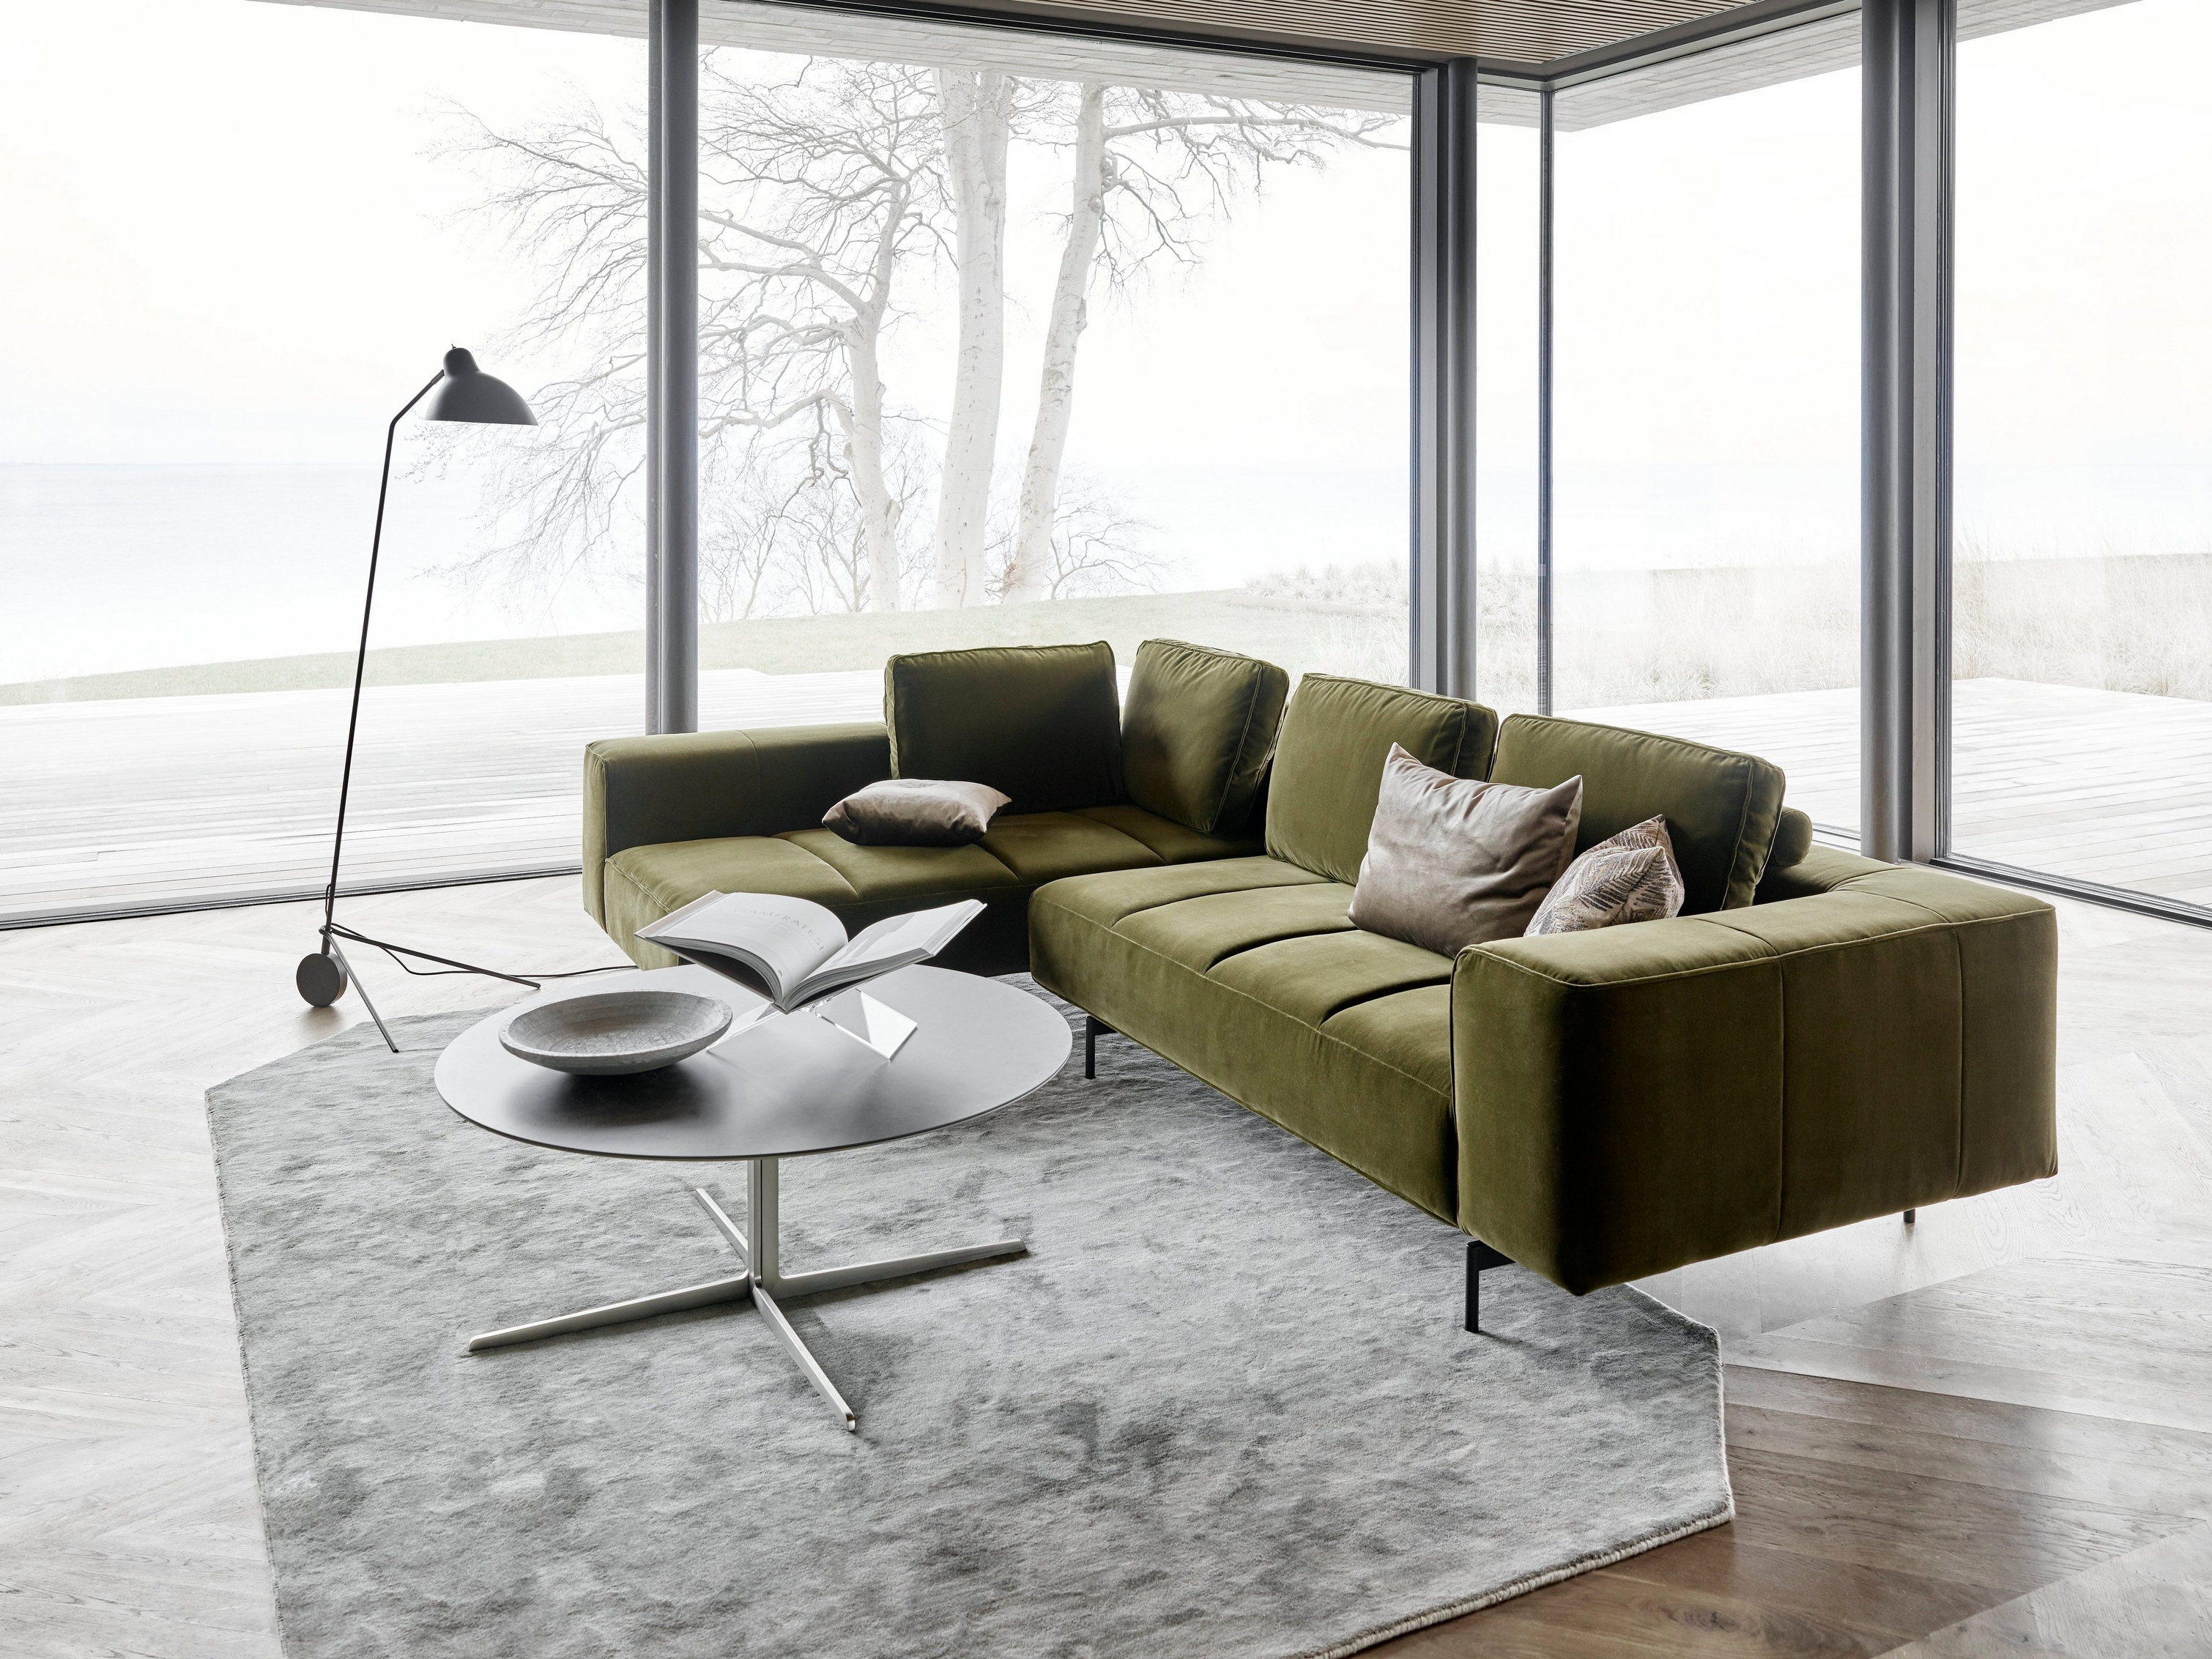 Modern green Amsterdam sofa, coffee table, floor lamp, by panoramic windows with a water view.